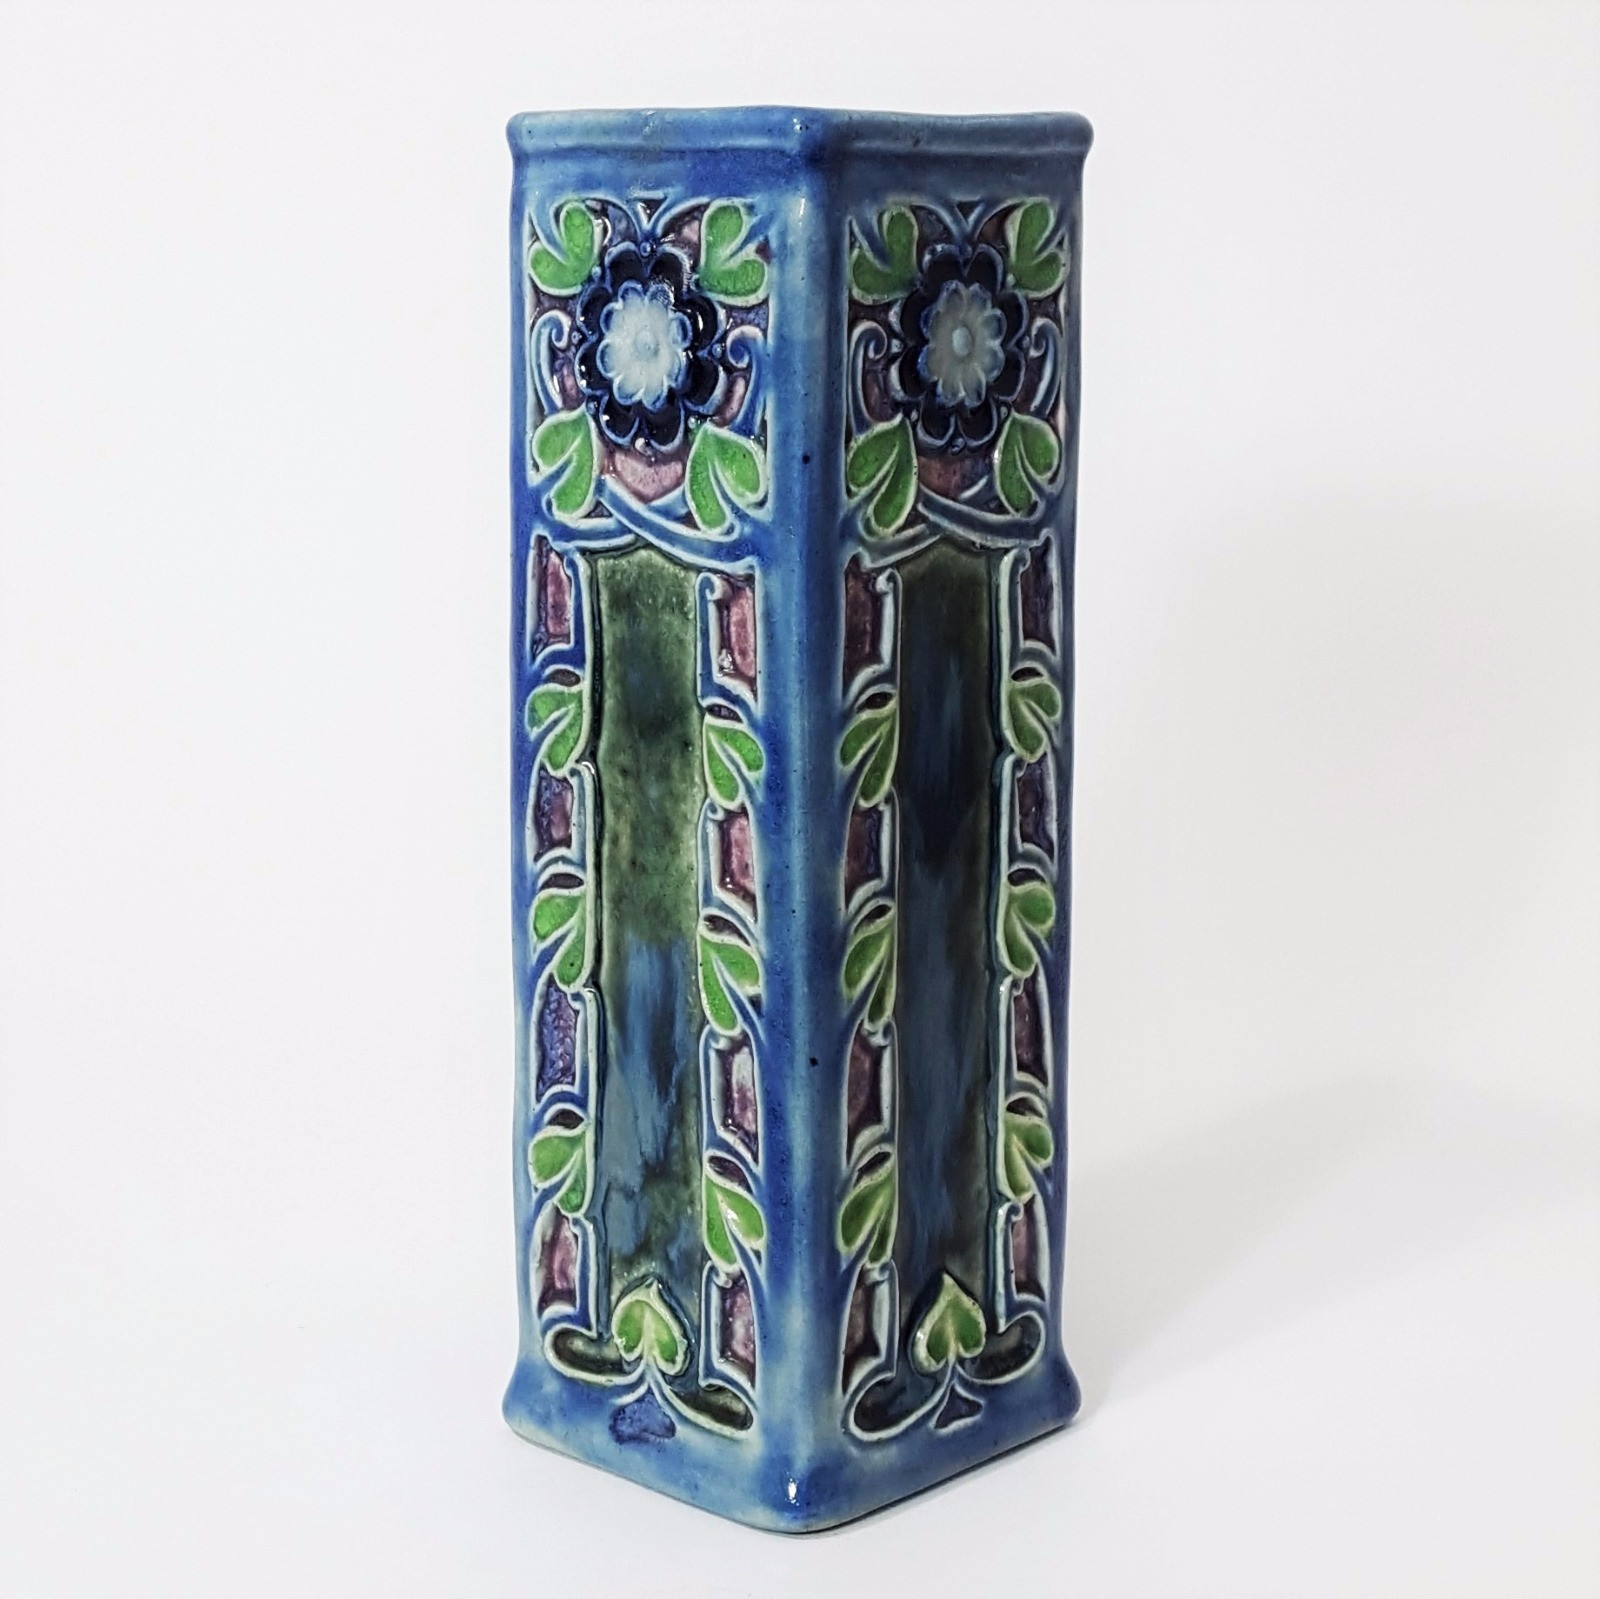 15 Amazing Royal Doulton Vases 1920 2024 free download royal doulton vases 1920 of royal doulton stoneware vase by francis pope c 1920 ec160 within royal doulton stoneware vase by francis pope c 1920 1 of 5